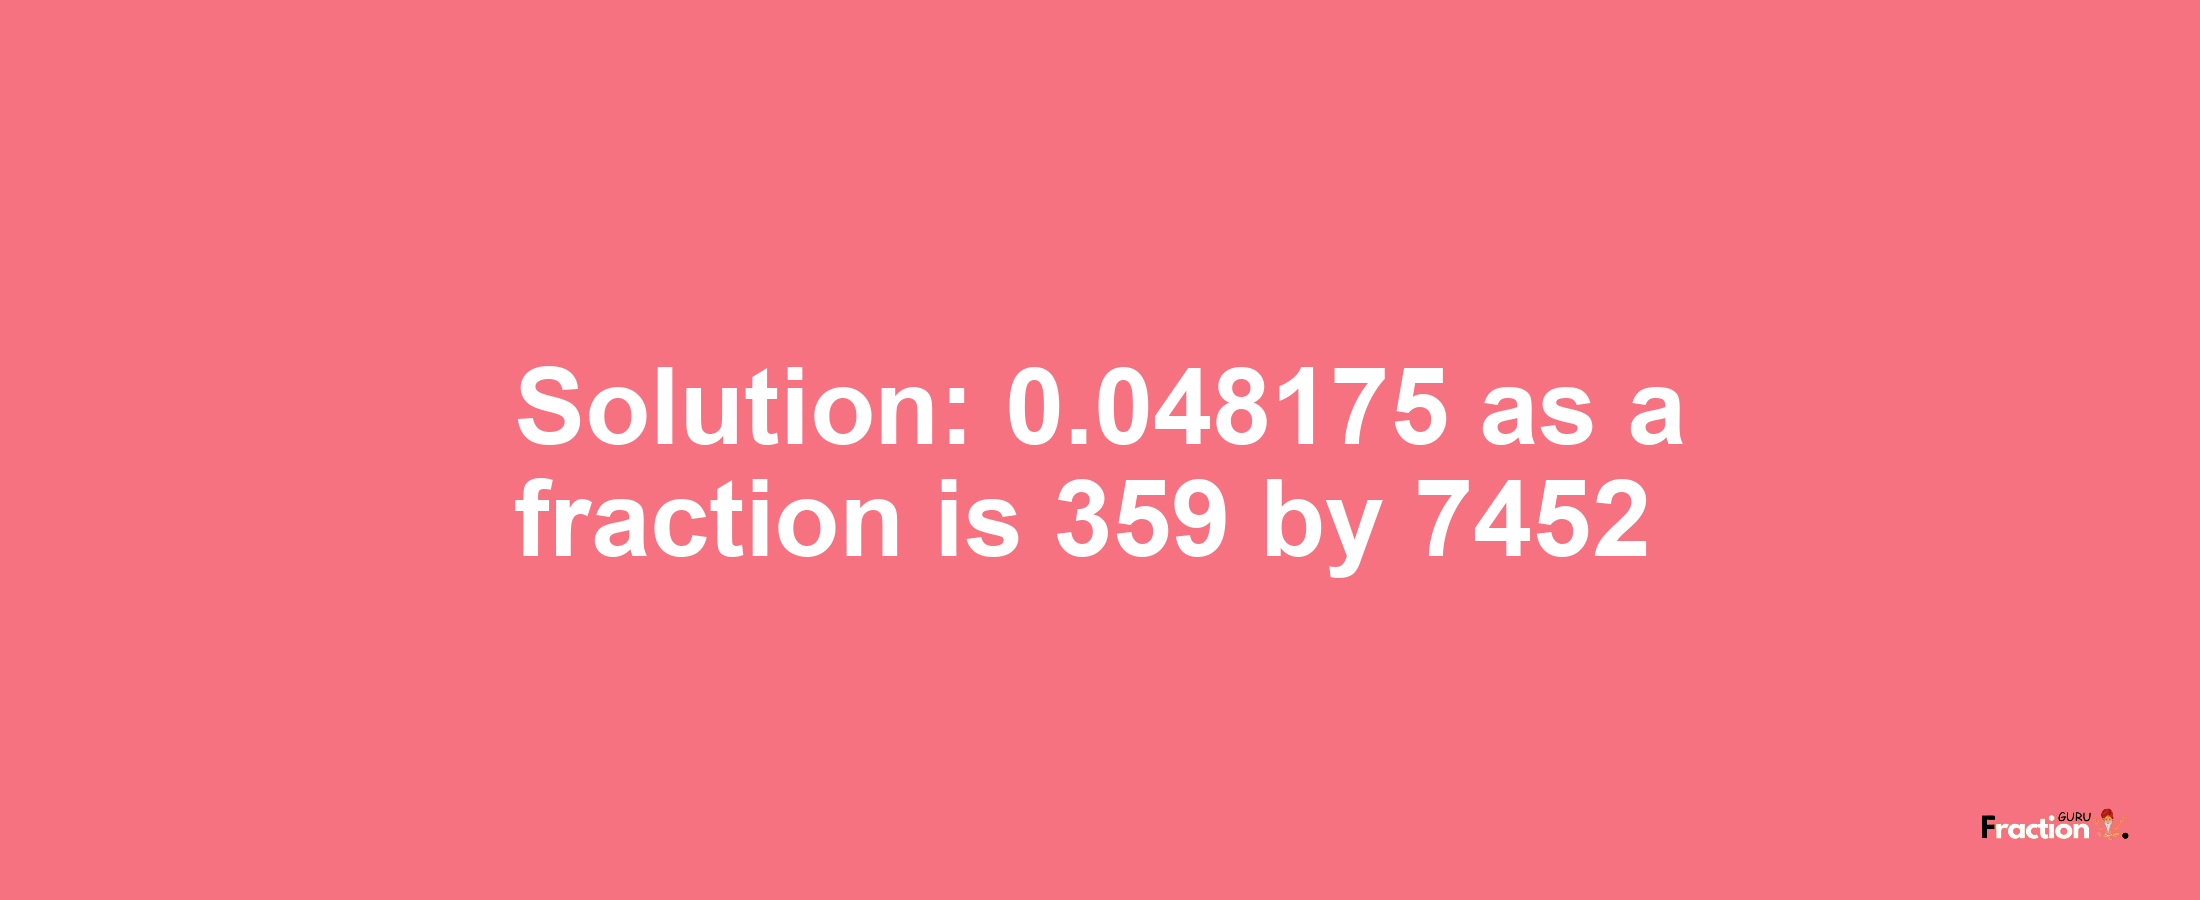 Solution:0.048175 as a fraction is 359/7452